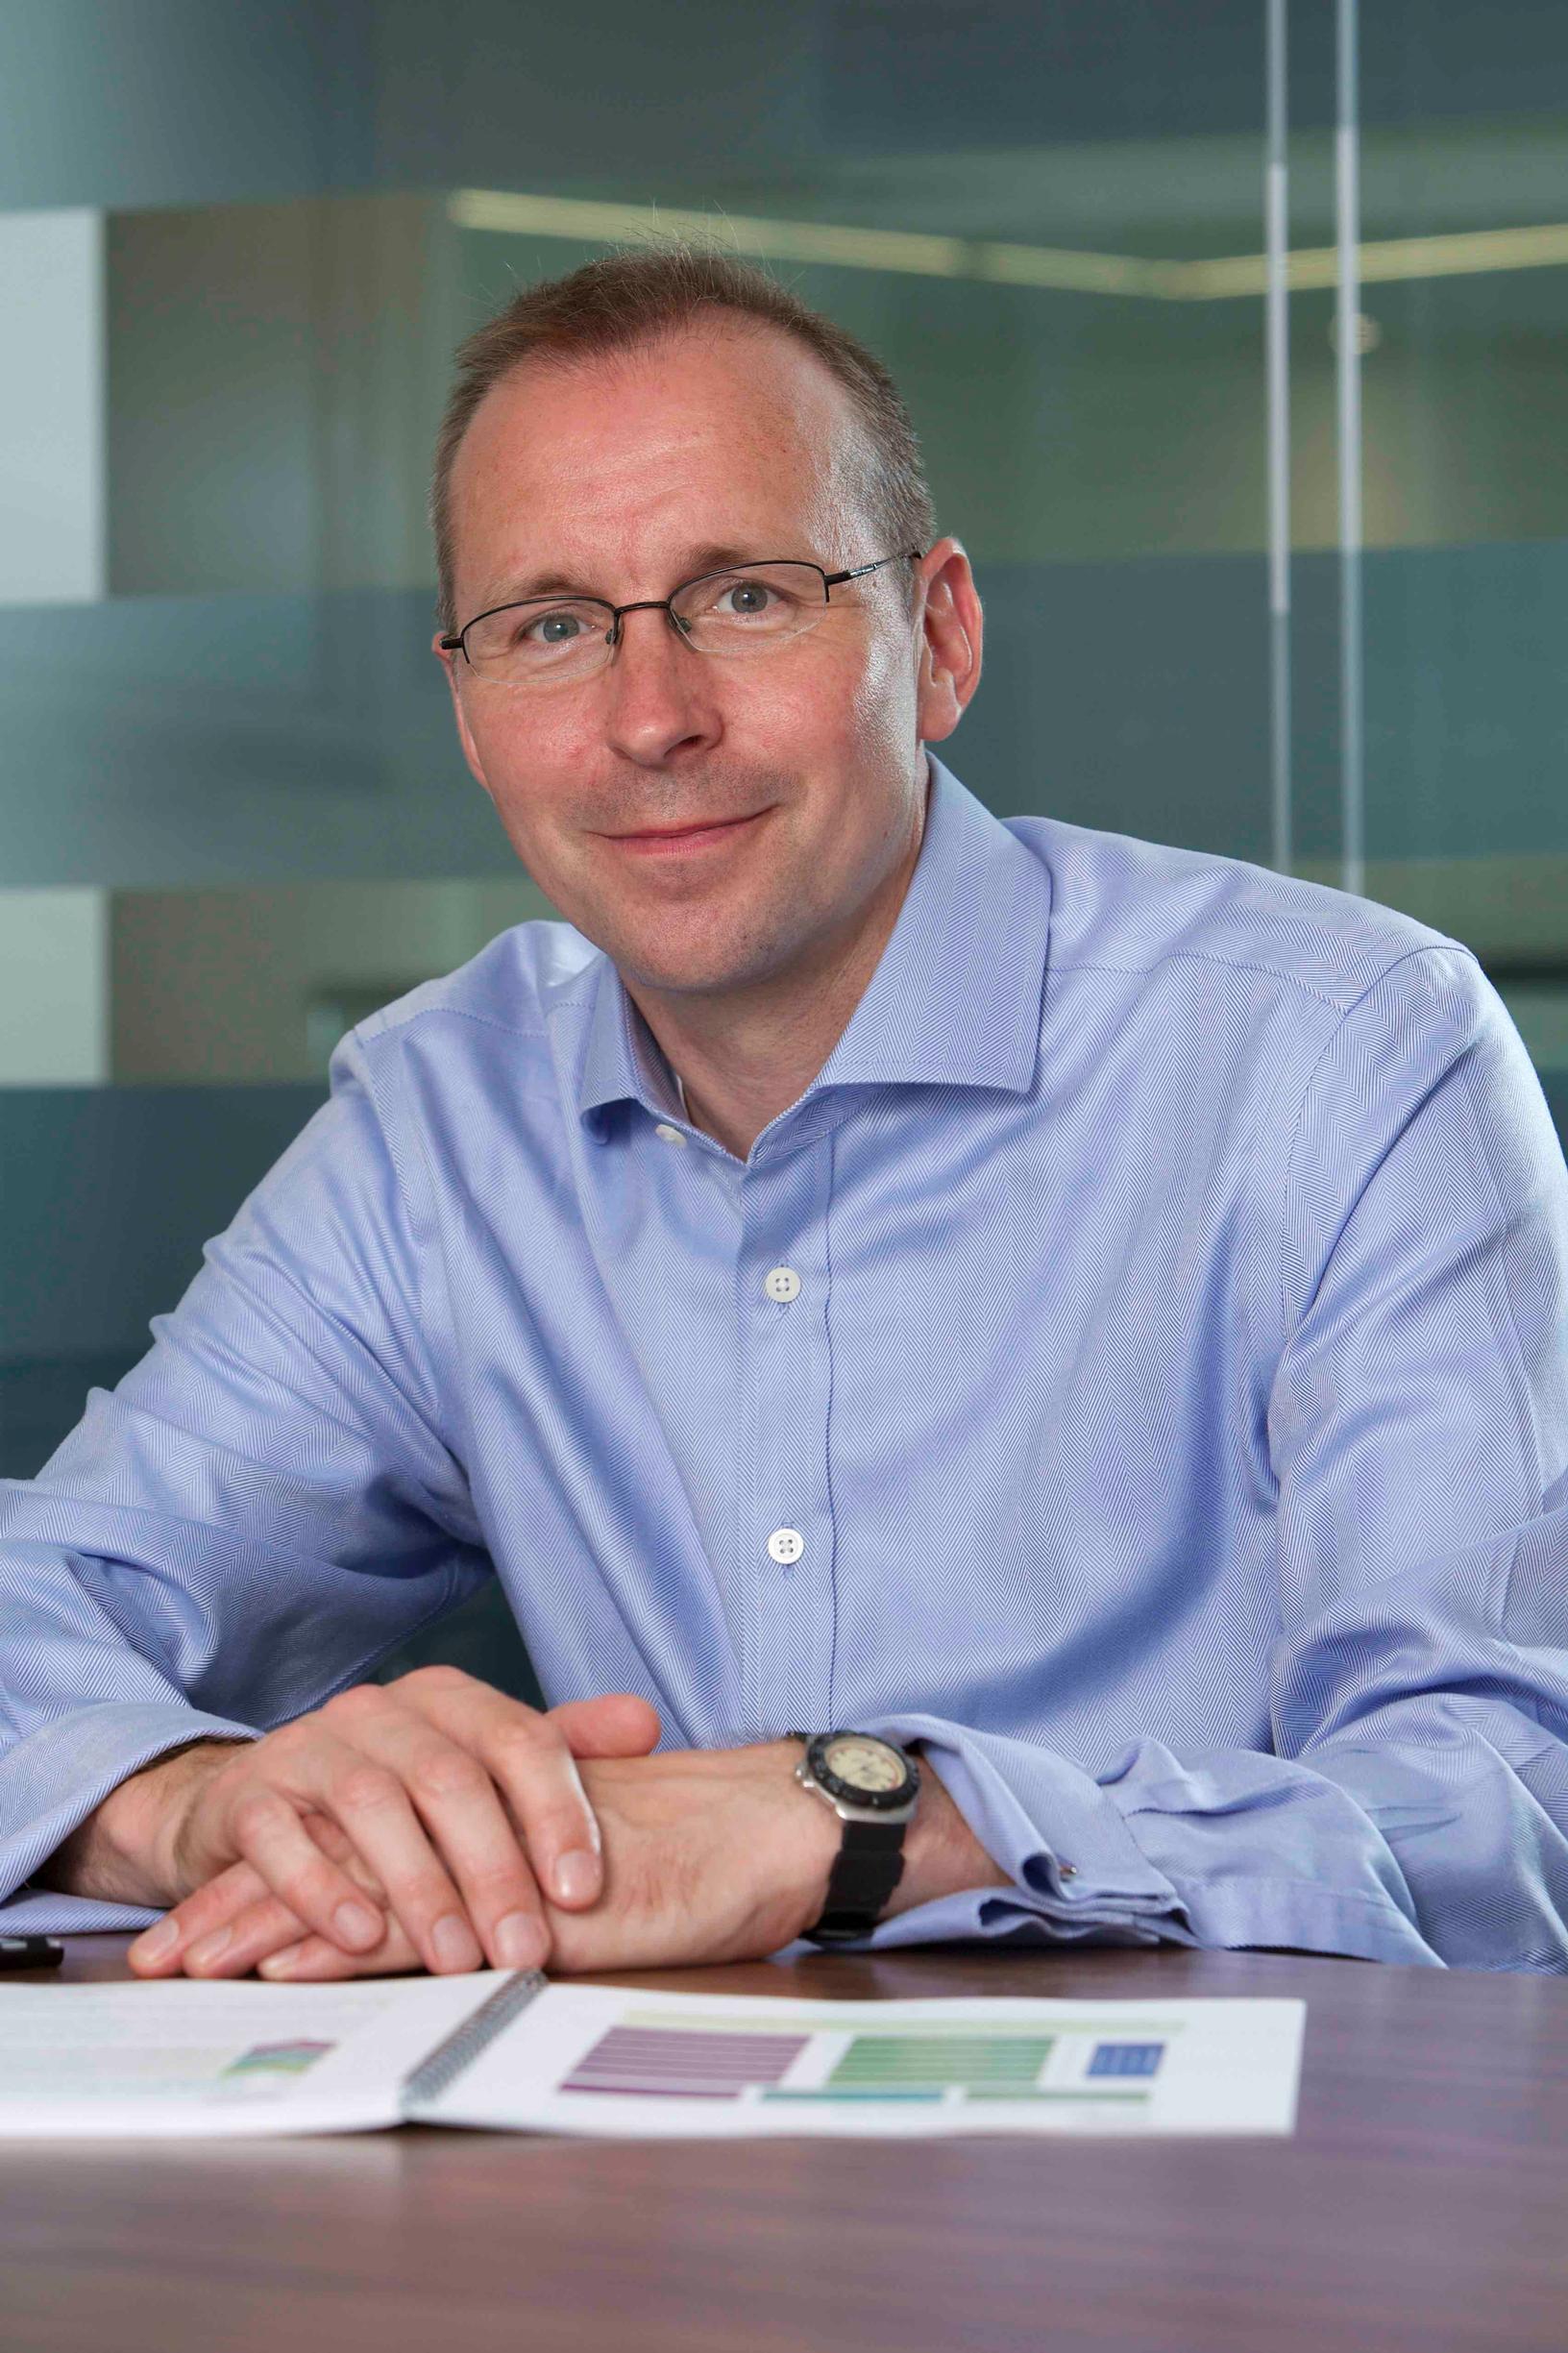 Ben Still, managing director of West Yorkshire Combined Authority